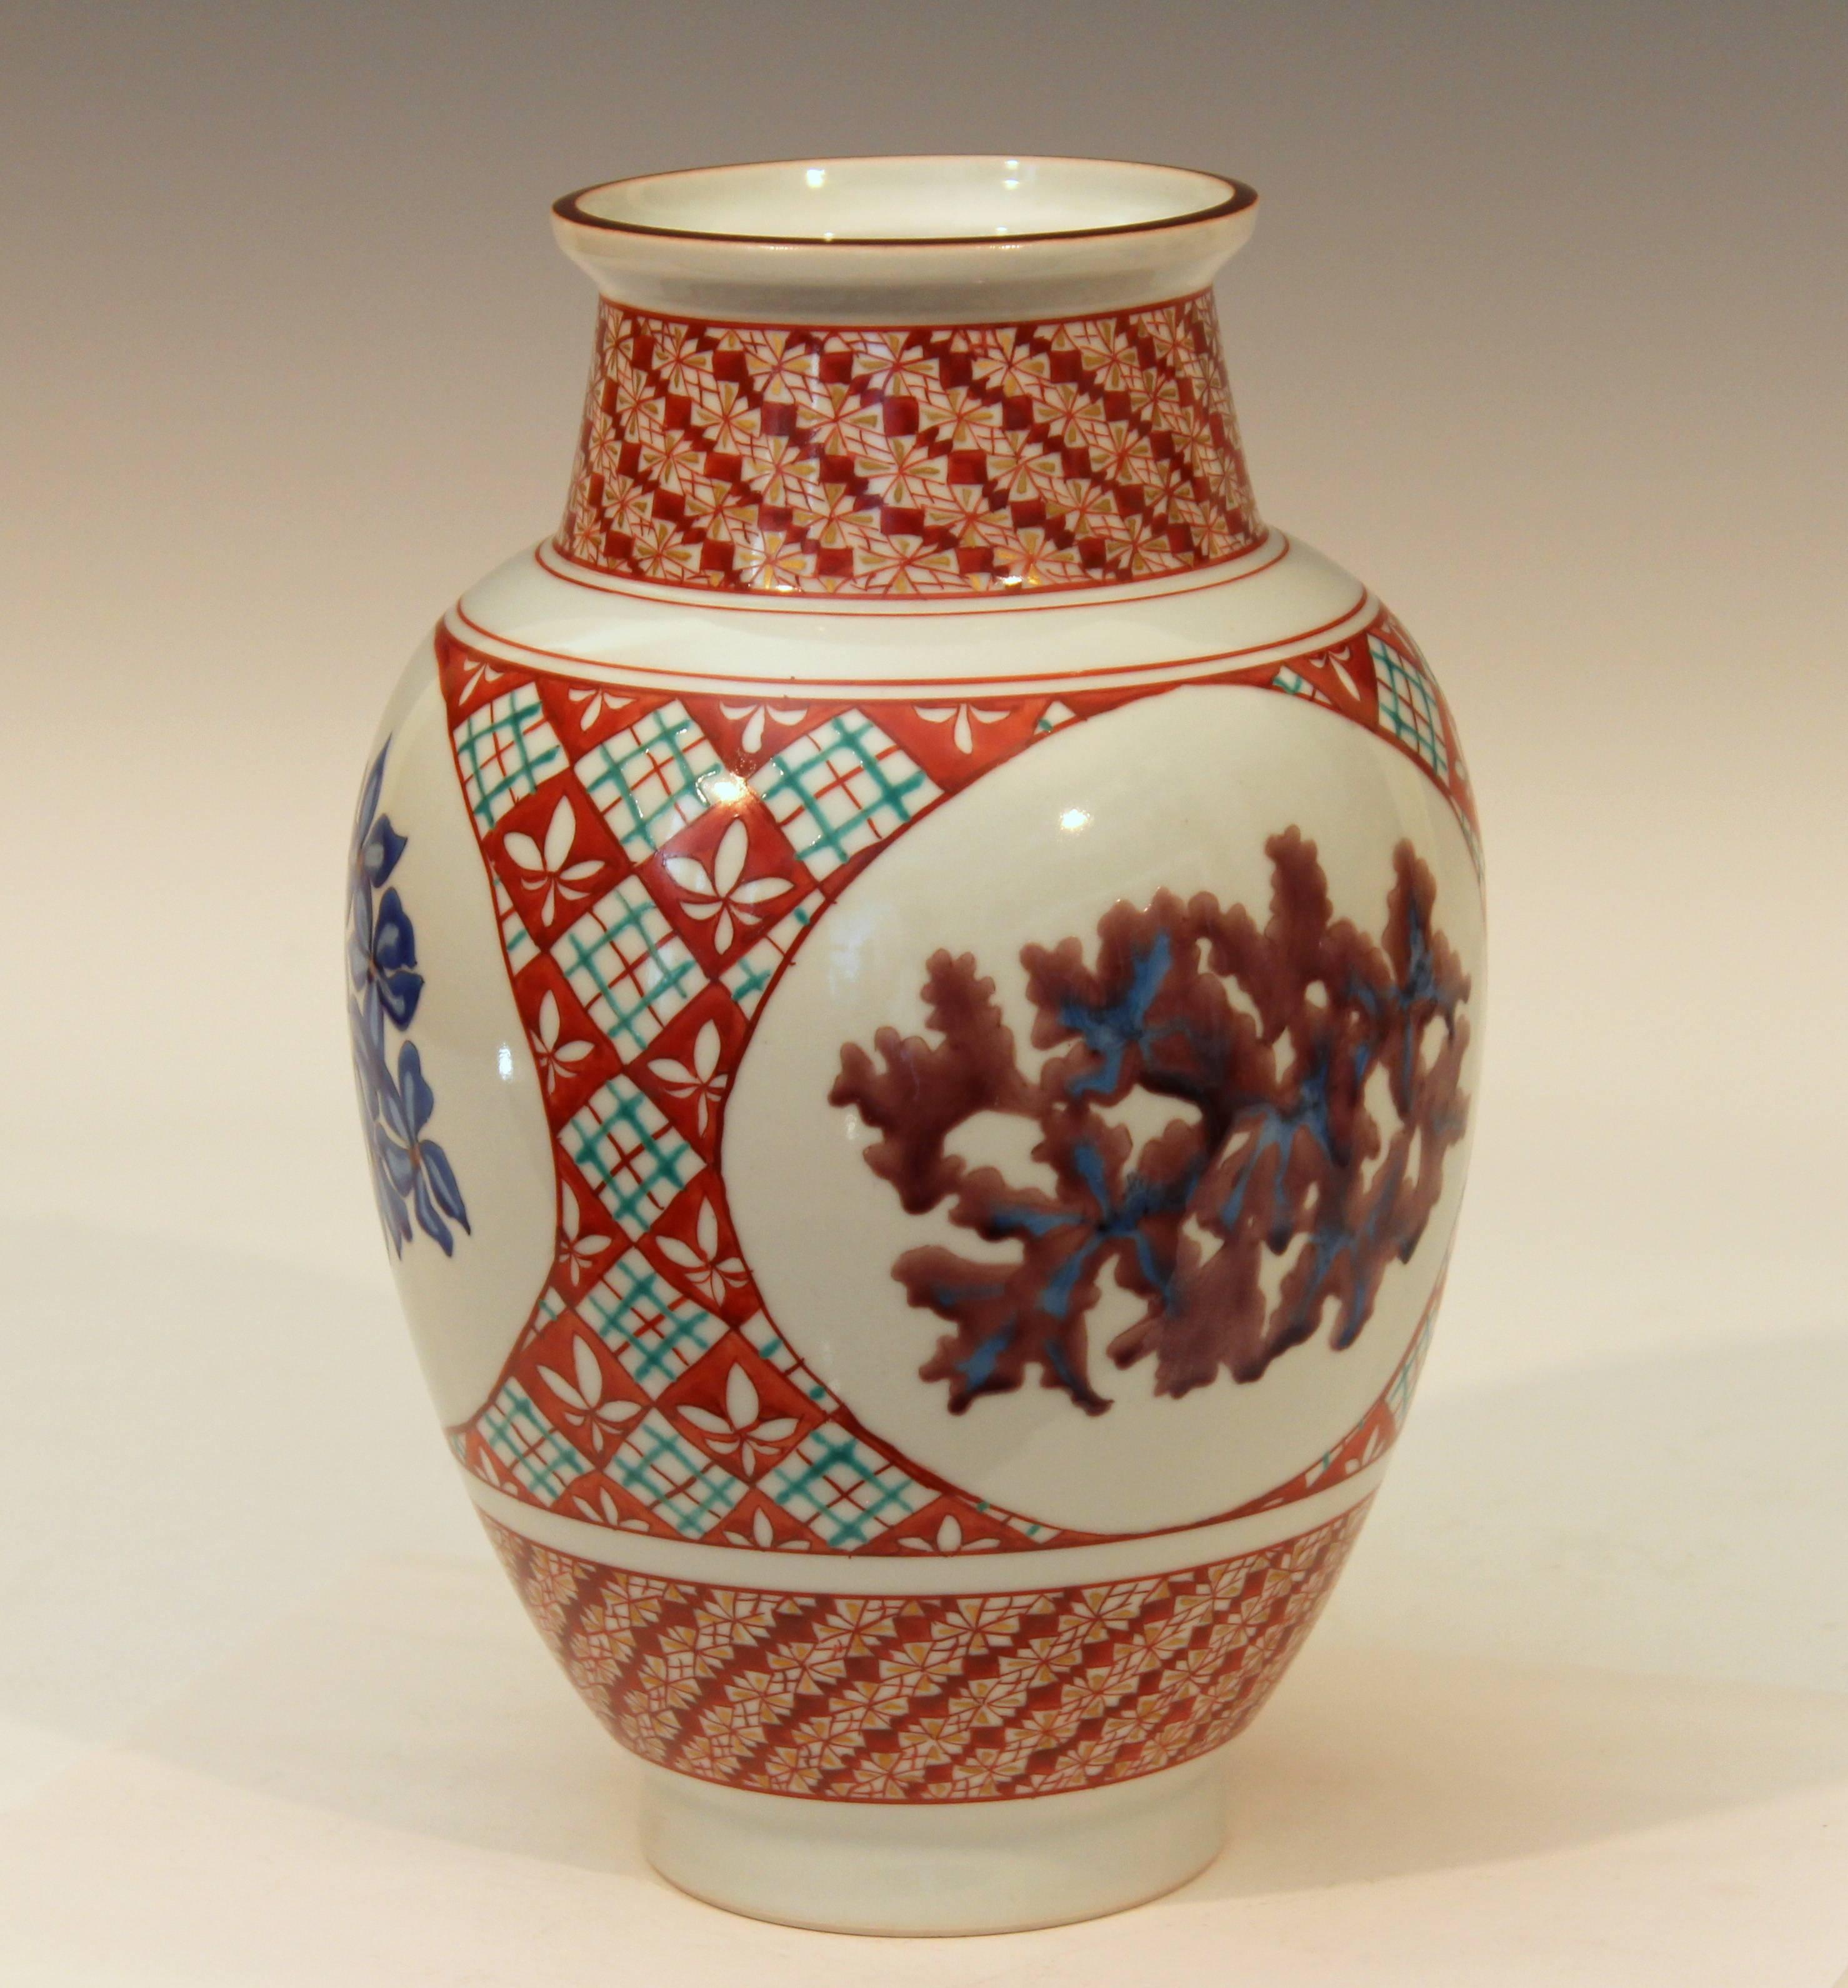 Kutani studio porcelain vase with three reserves of colored blossoms against a background of elaborate geometric designs, circa late 20th century. 9 5/8